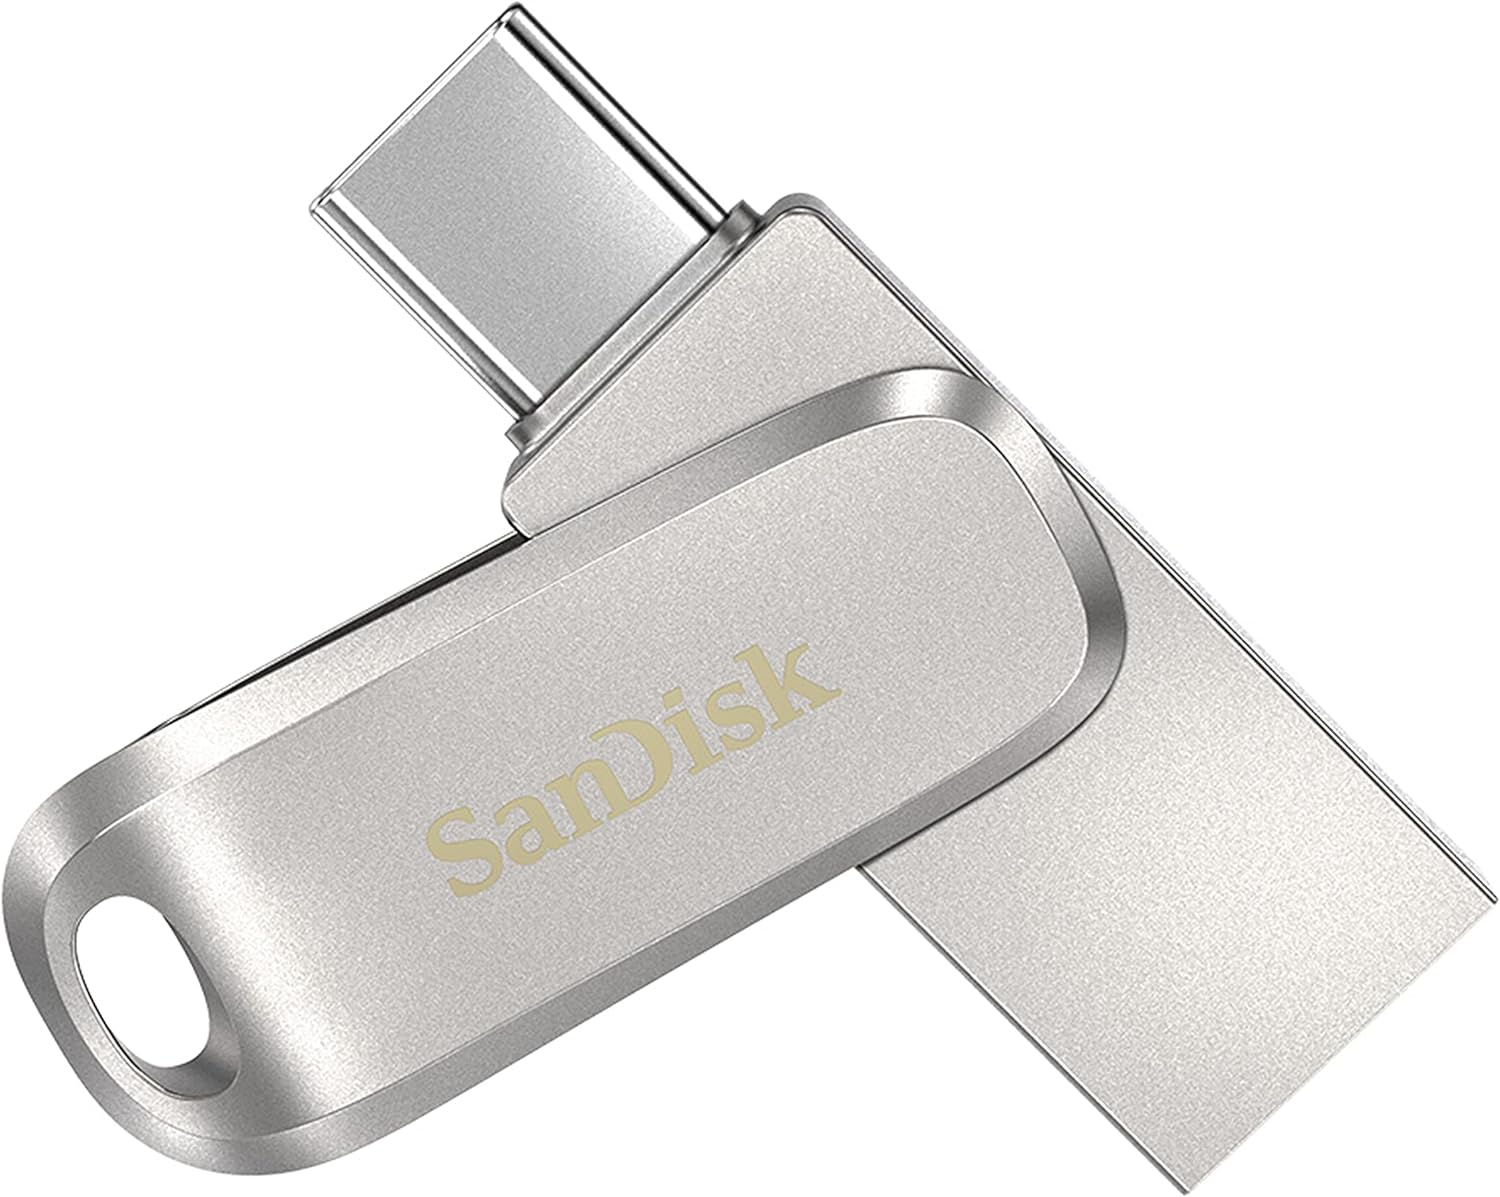 SanDisk 256GB Ultra Dual Drive Luxe USB Type-C - SDDDC4-256G-G46, Silver